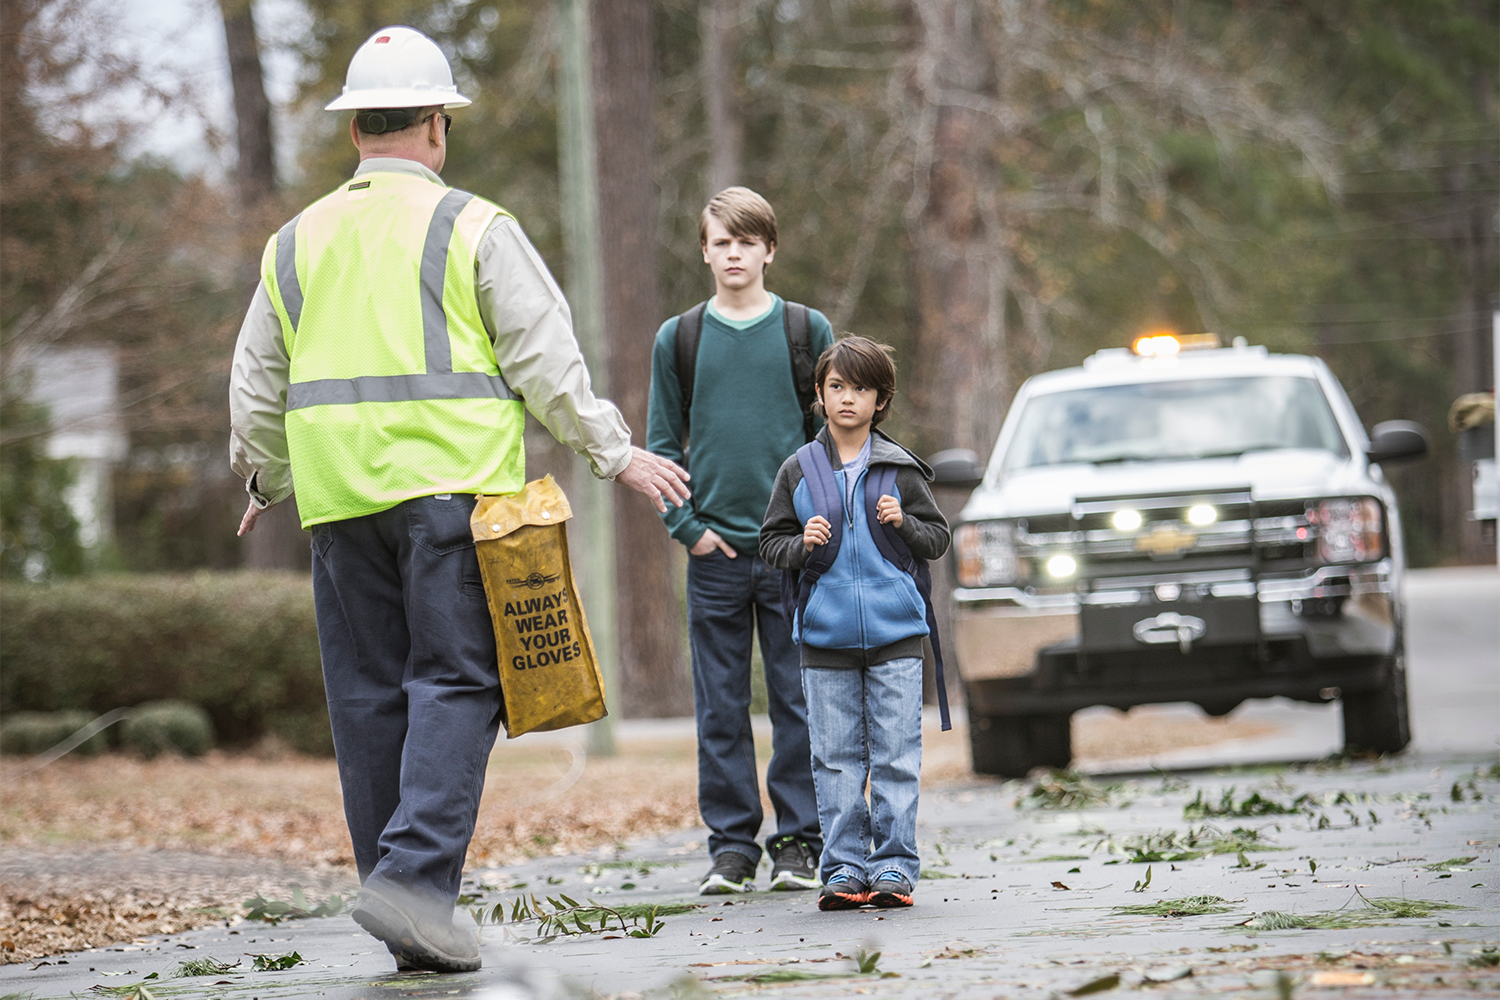 An electric lineman warns children to stay away from downed powerlines